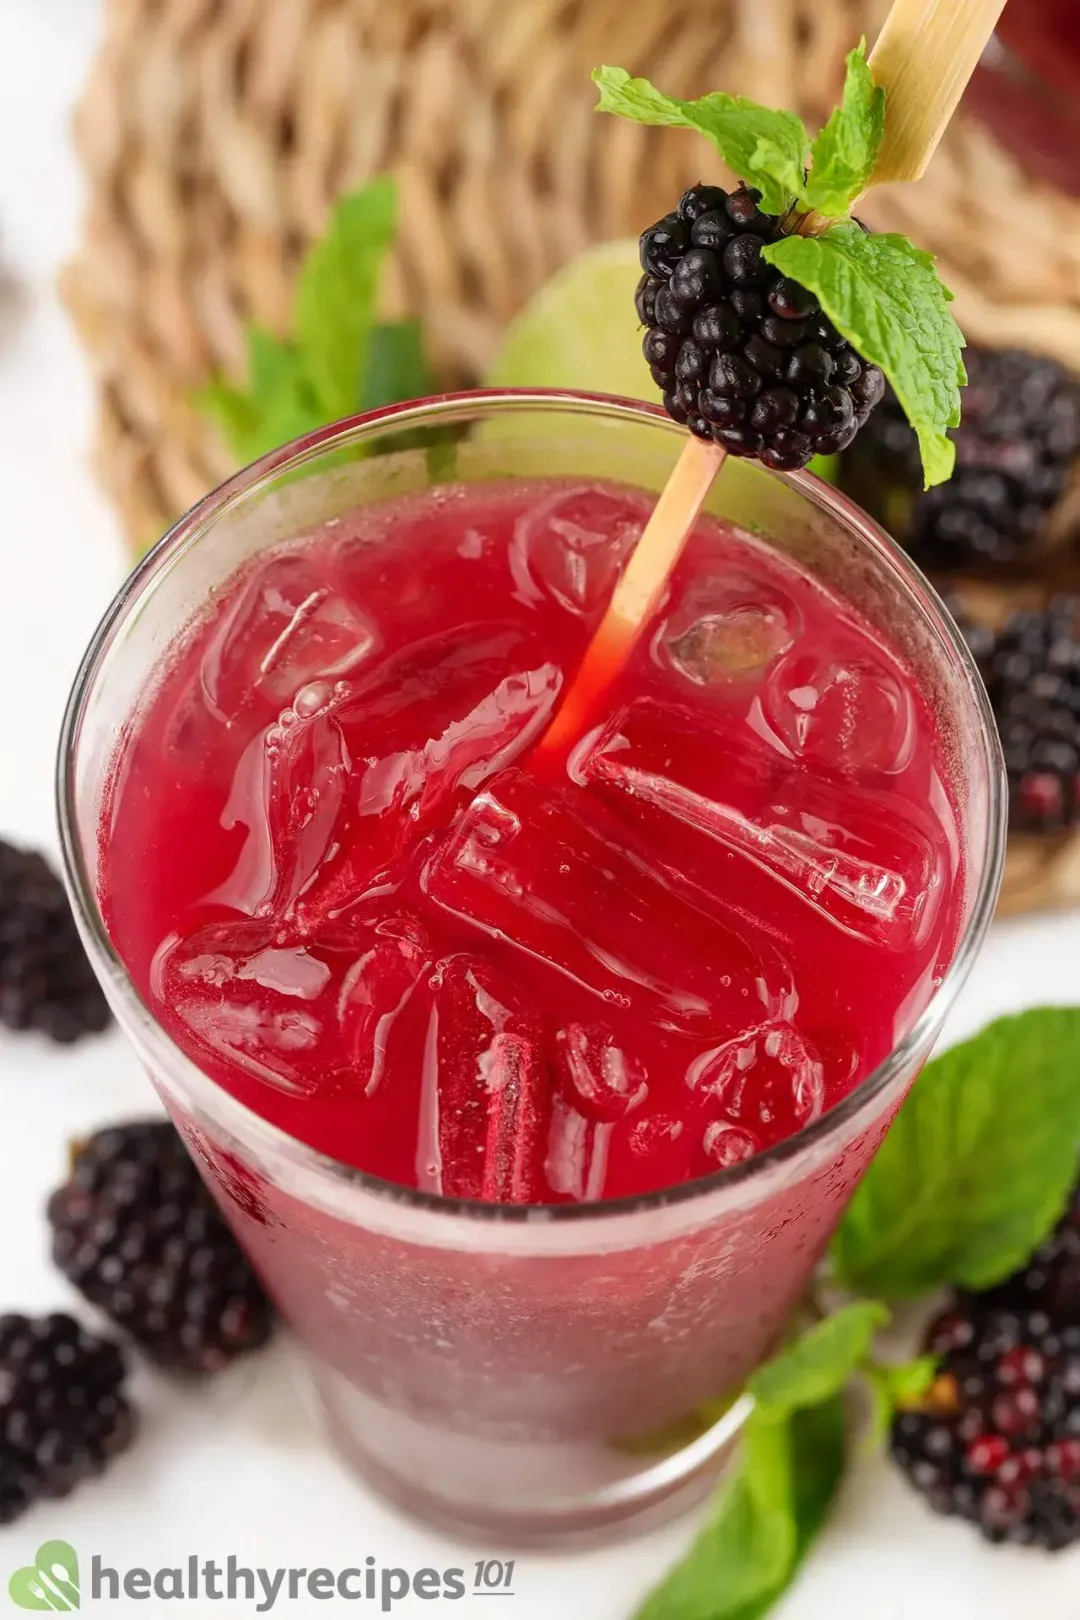 An iced glasses of black berry juice drinks with blackberries and mints all lying around